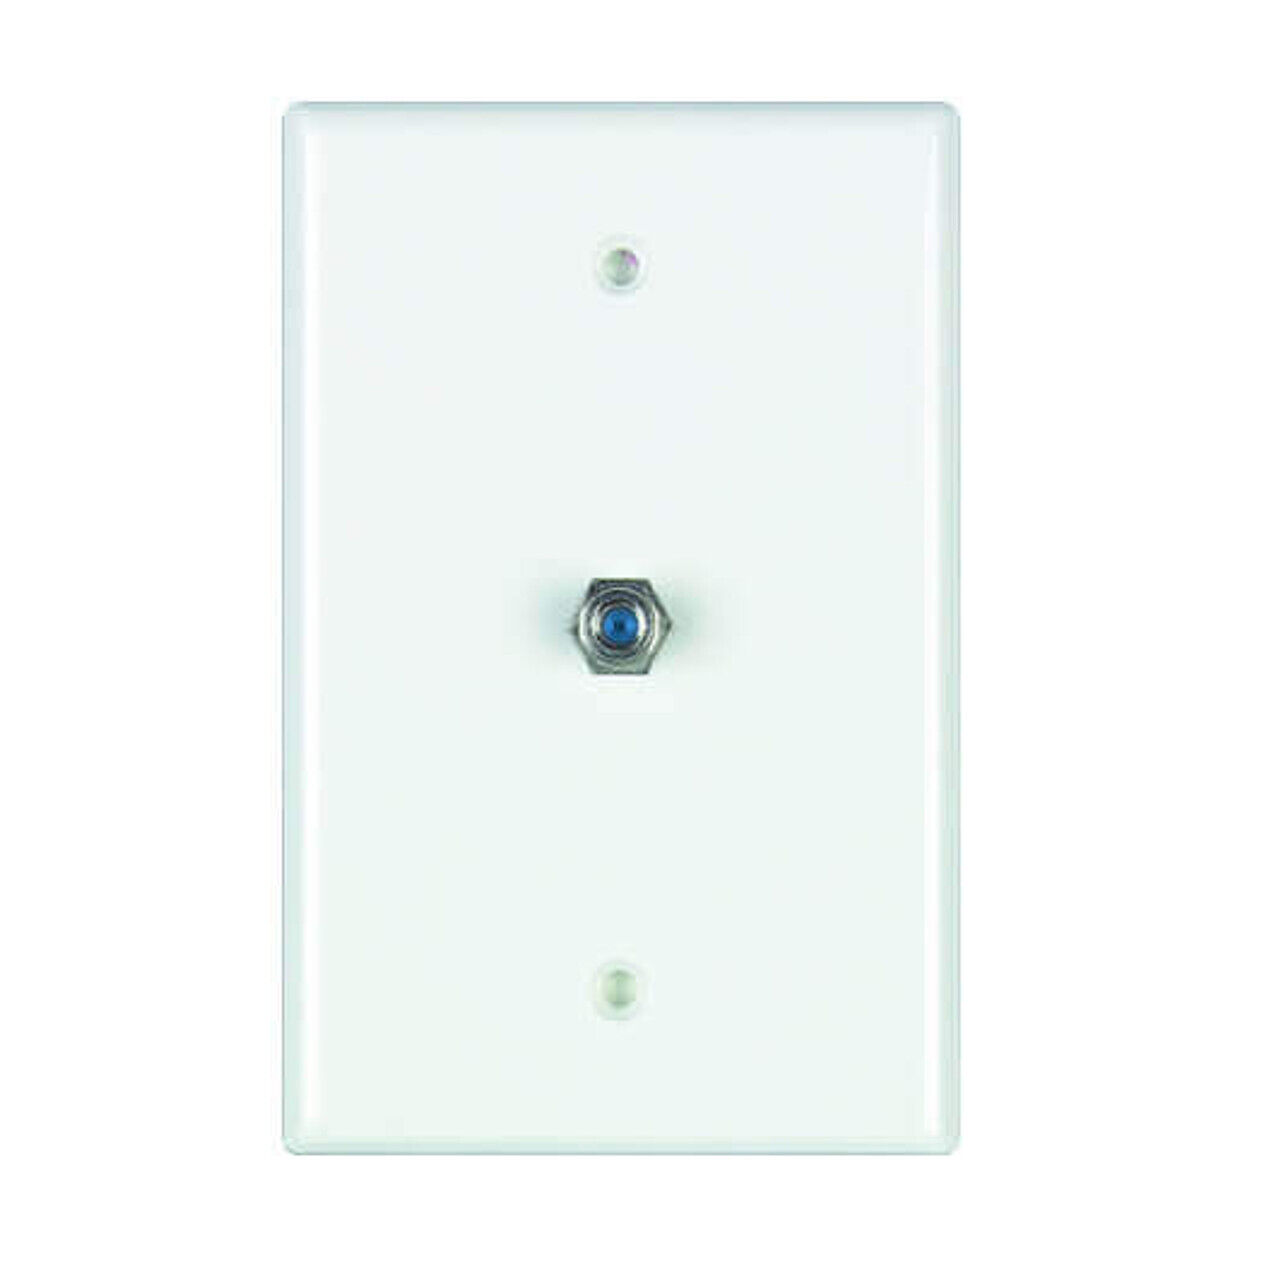 DataComm 32-2024-WH 32-2024-IV  2.4 GHz Coax Wall Plate (Box of 200)